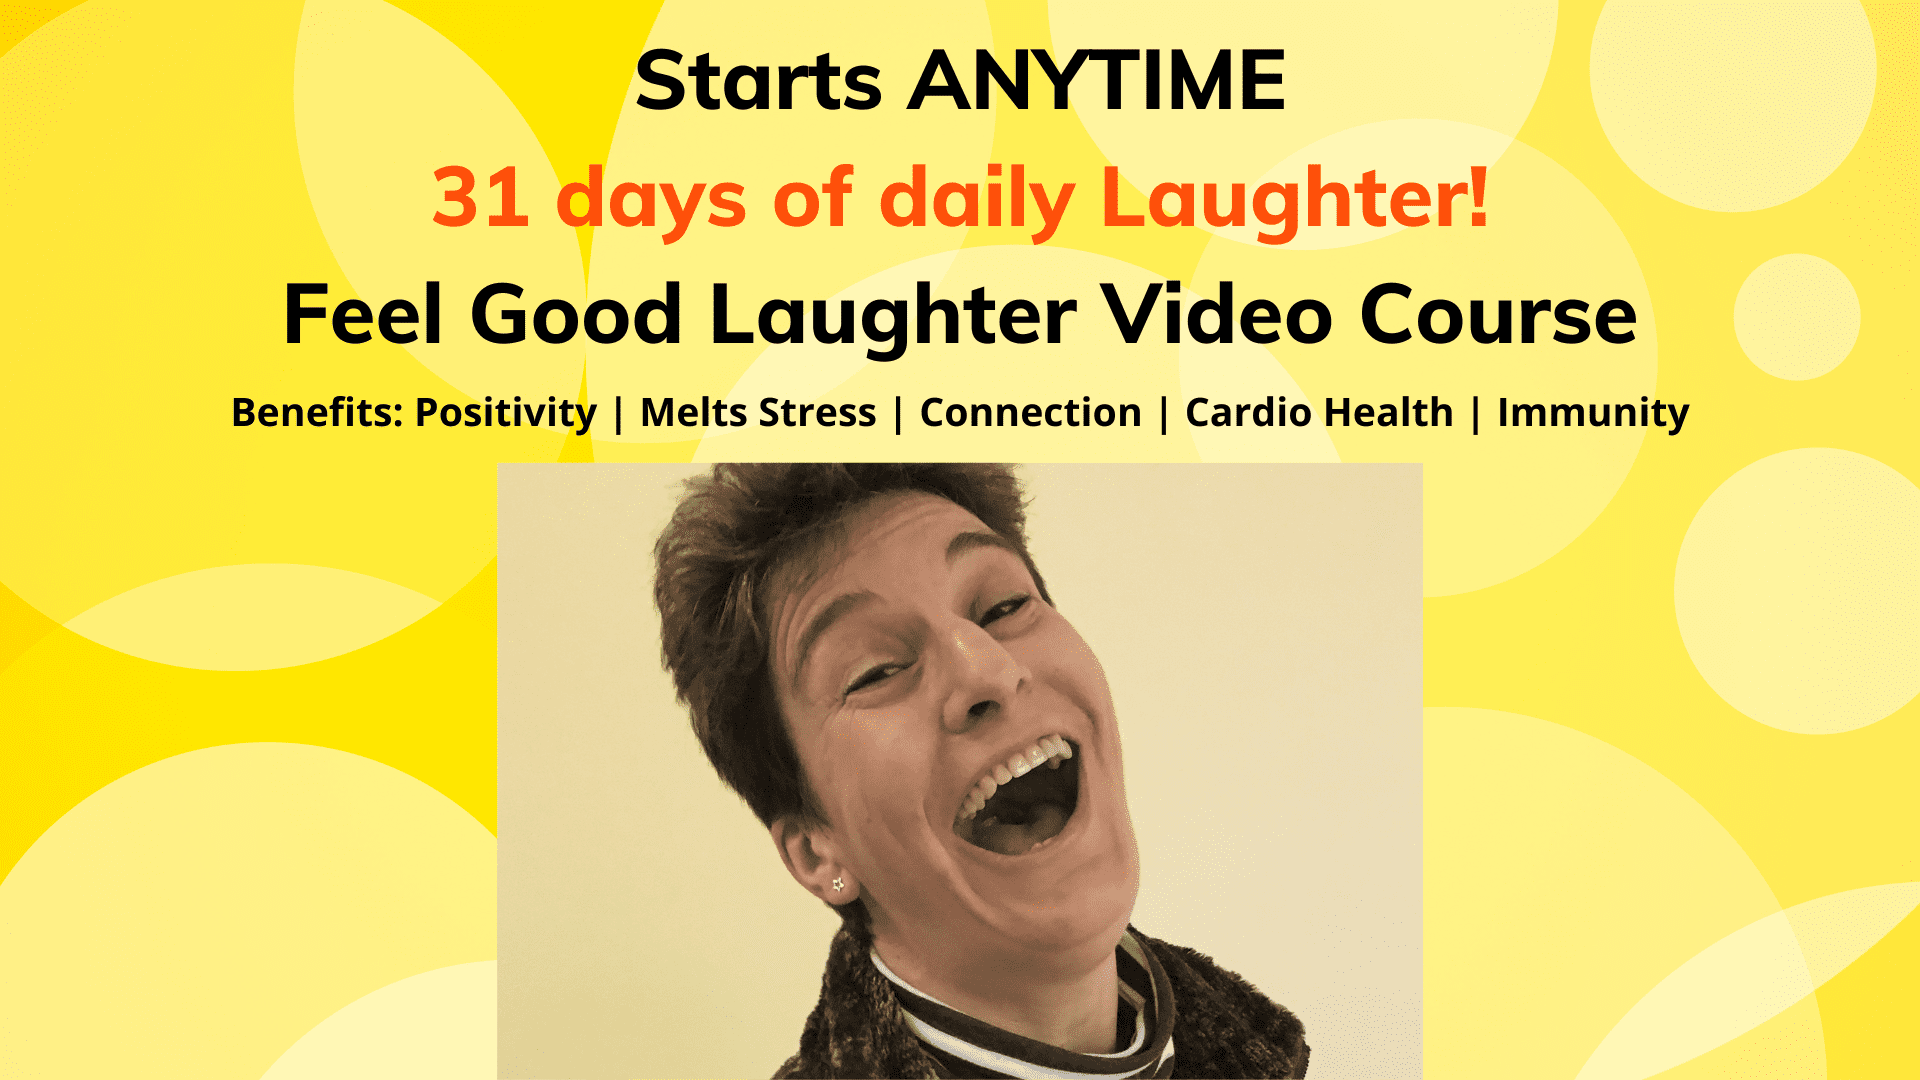 Feel Good Laughter Video Course with woman with short dark hair laughing